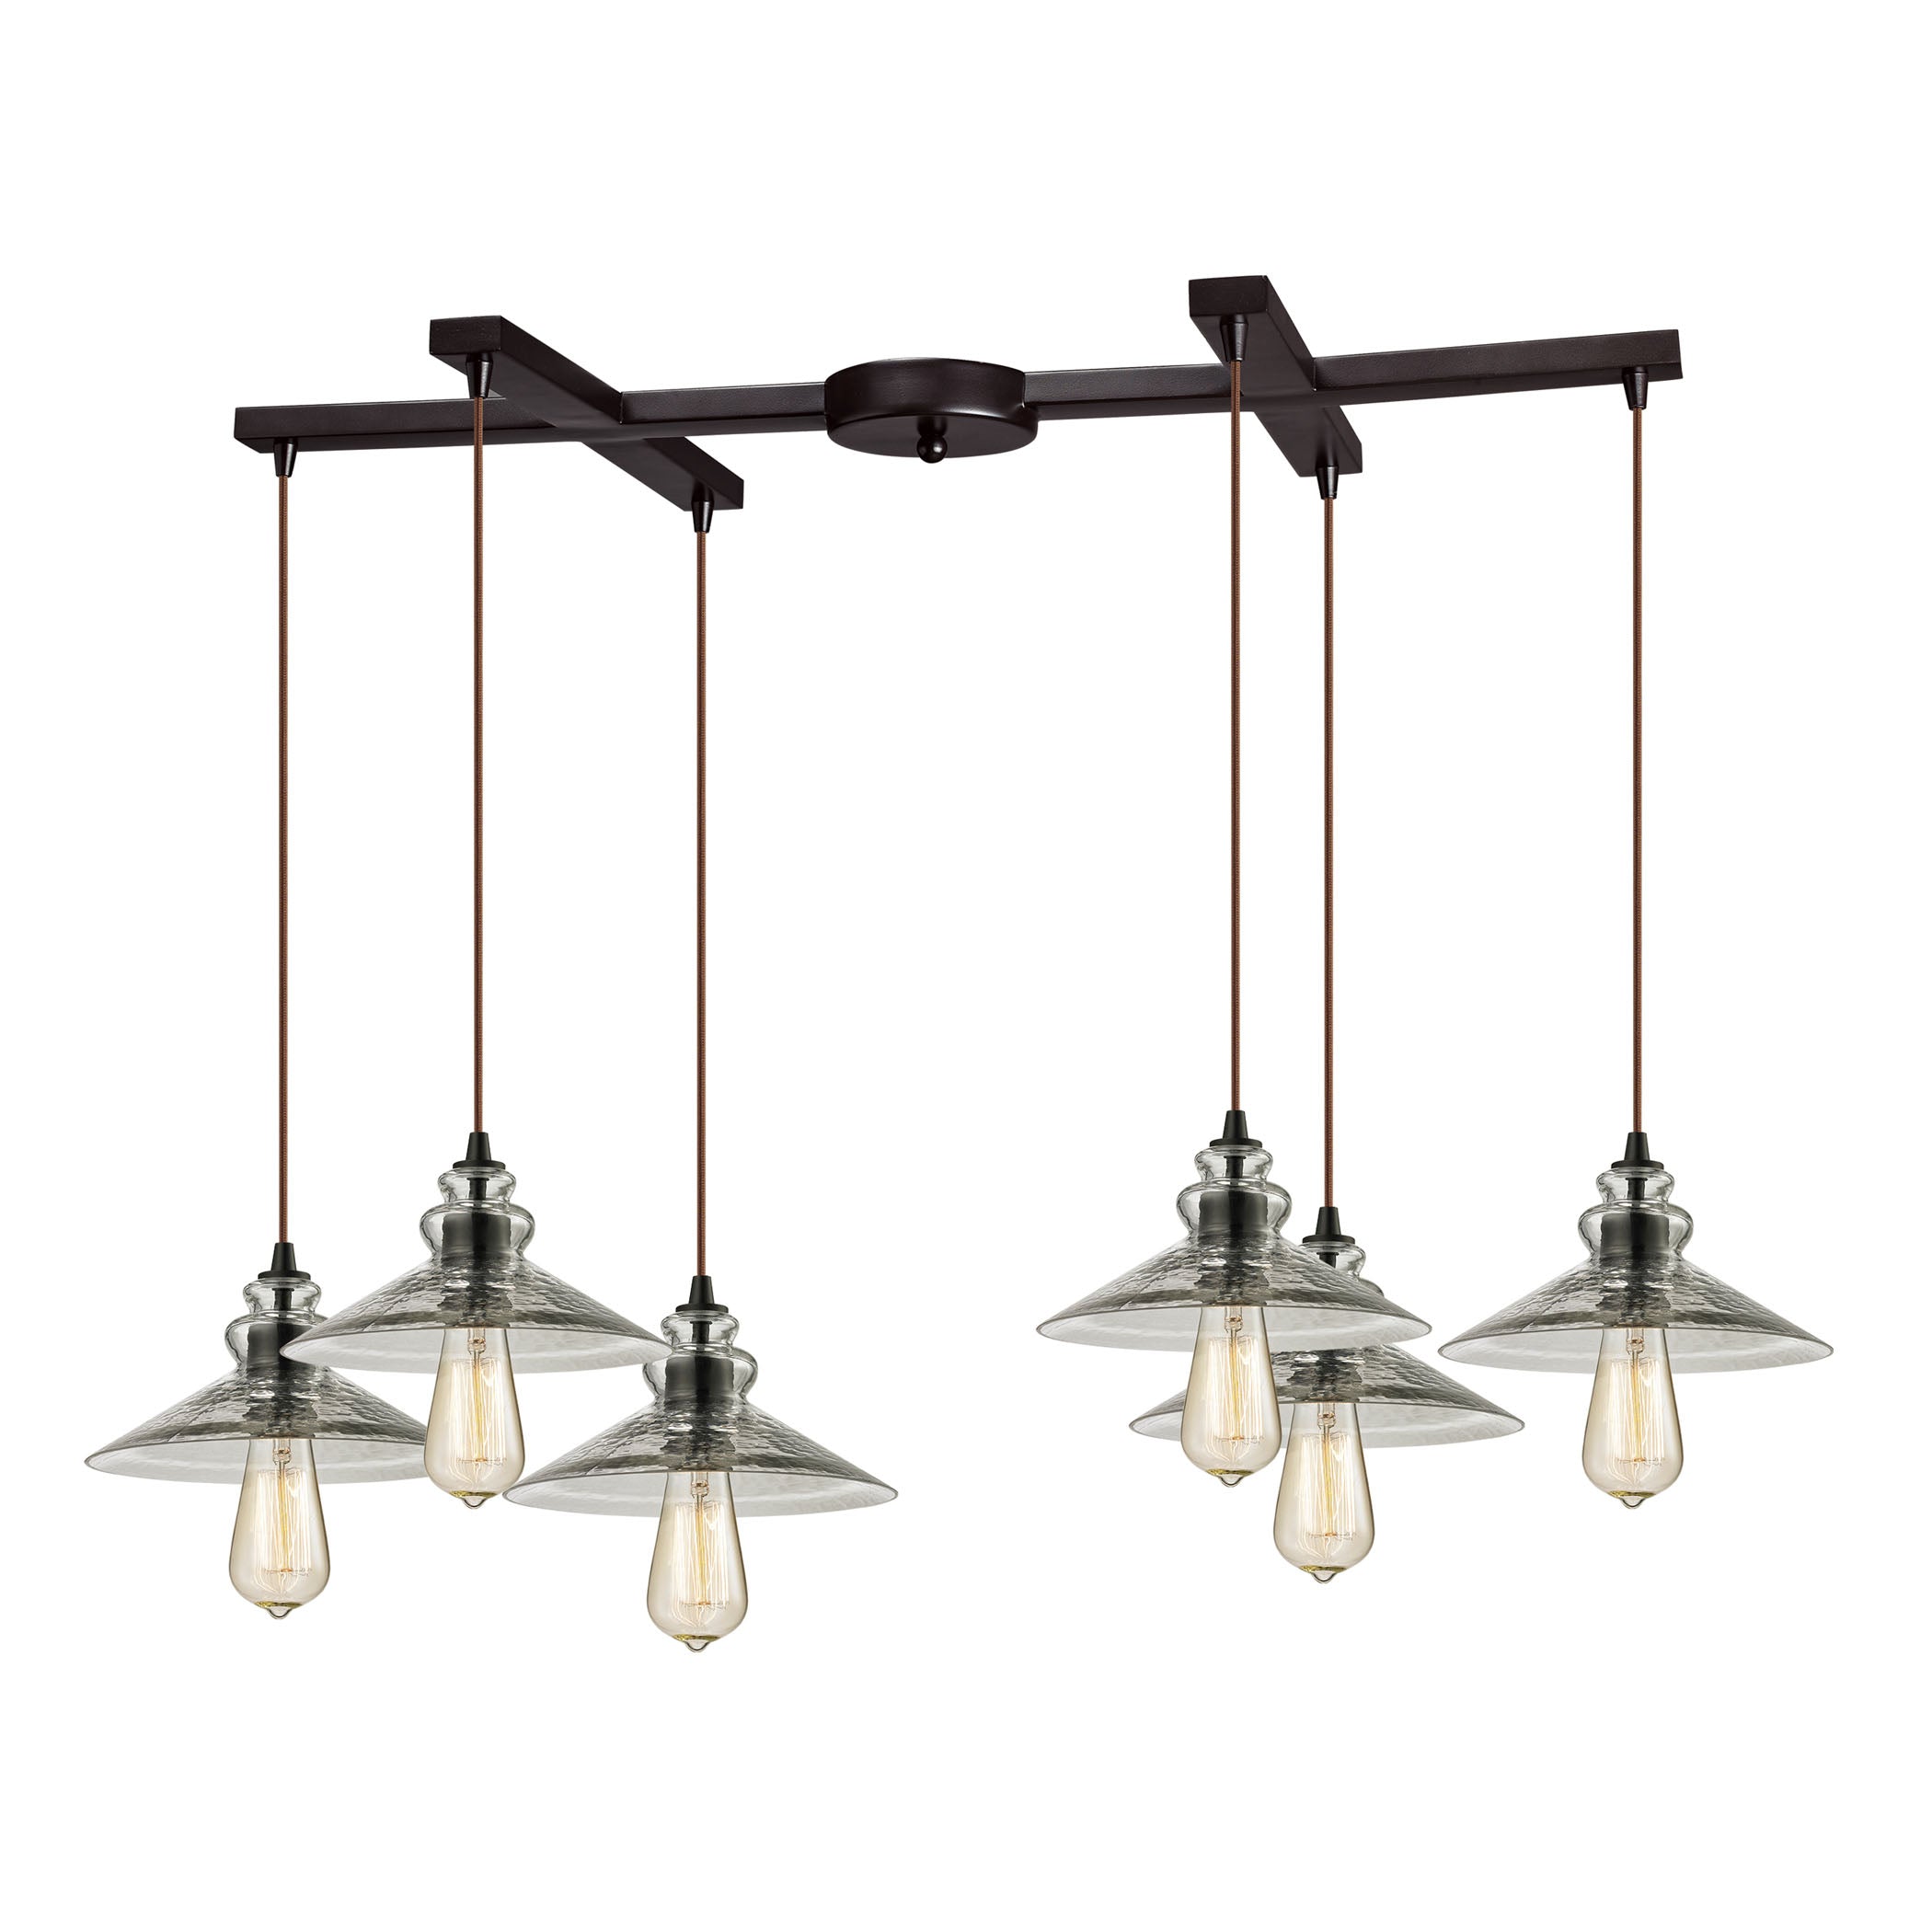 ELK Lighting 10332/6 Hammered Glass 6-Light H-Bar Pendant Fixture in Oiled Bronze with Hammered Clear Glass